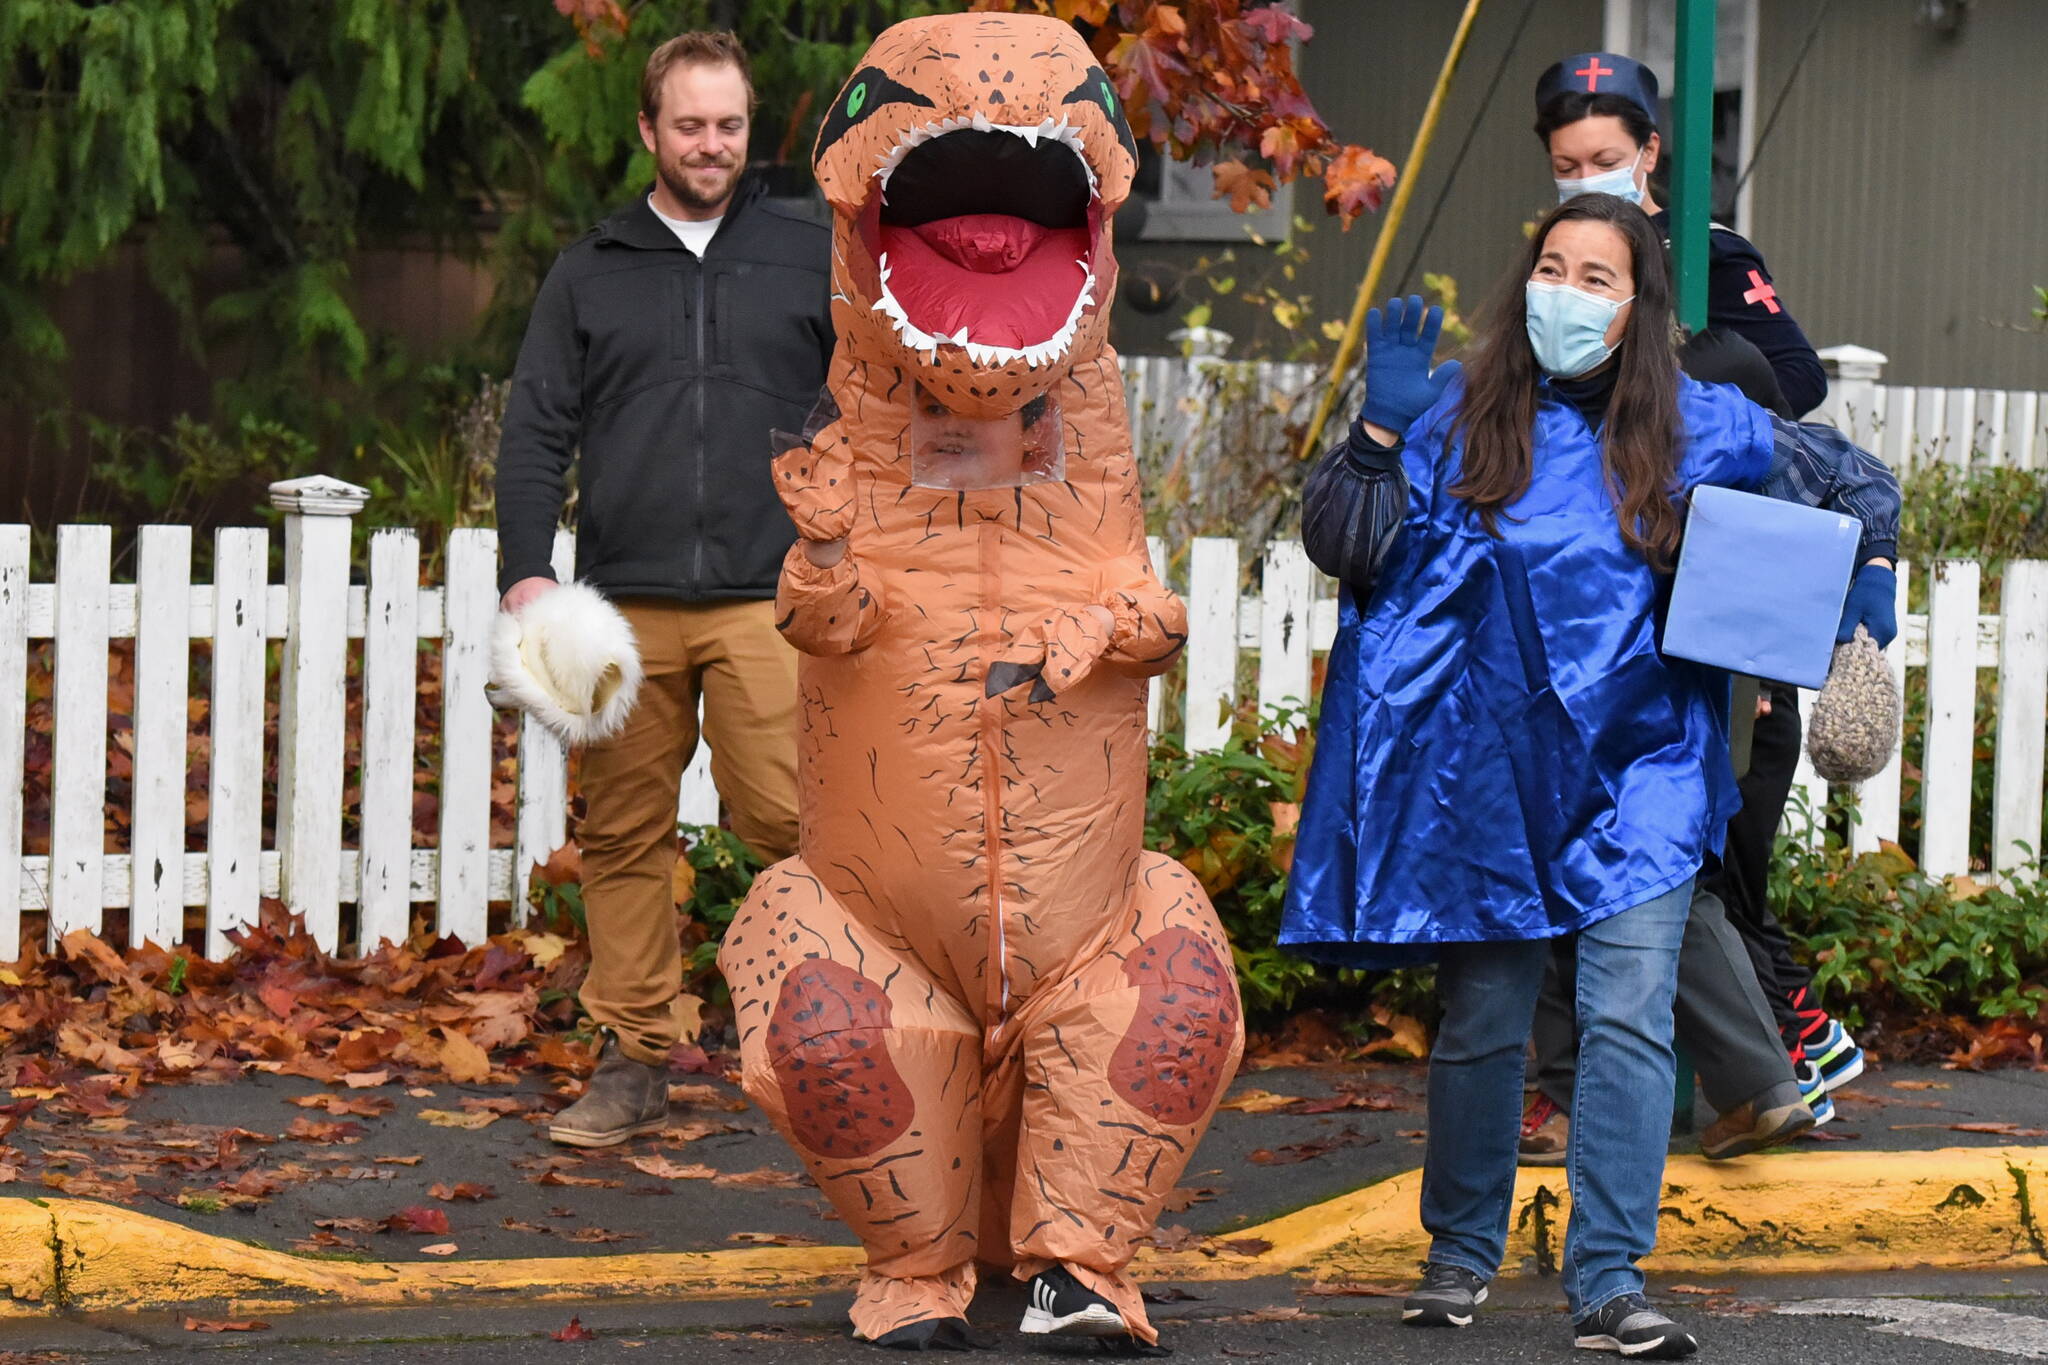 Staff photo/Tate Thomson
Friday Harbor Elementary School students showed off their costumes at the 2021 Halloween Parade on Friday, Oct. 29 at 9 a.m.